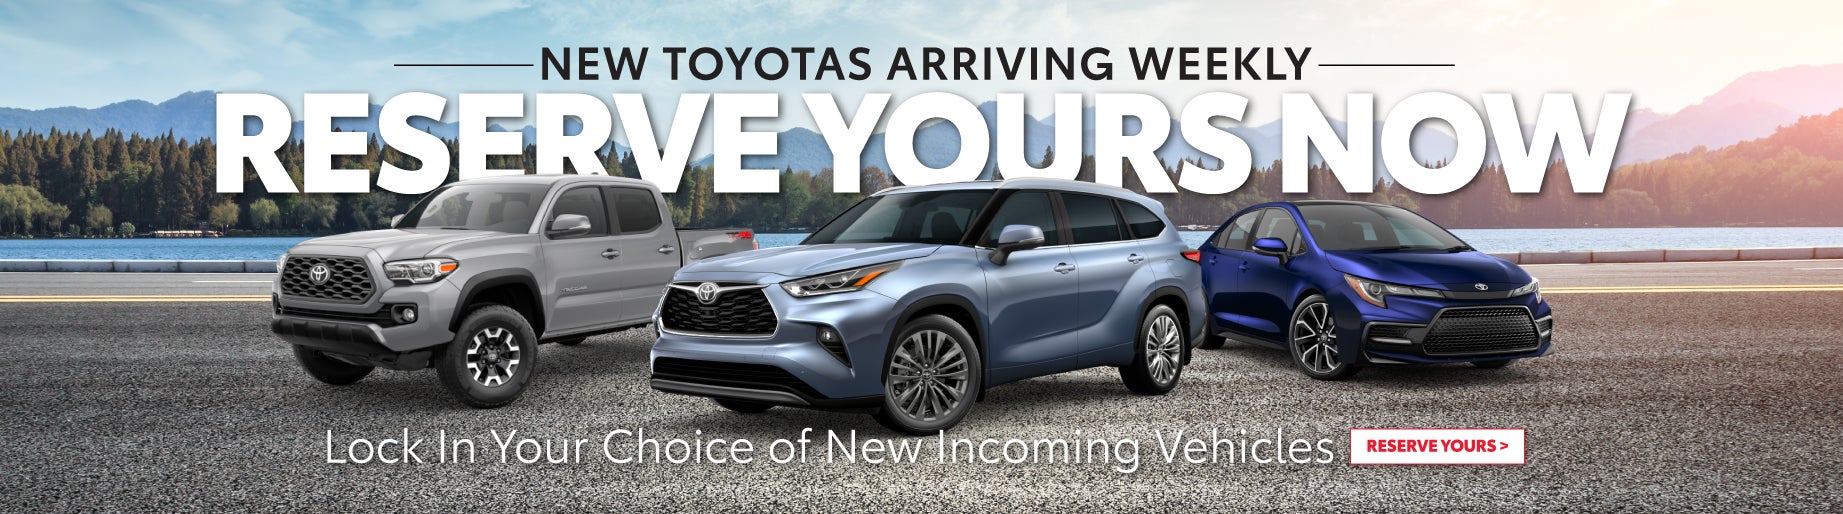 RESERVE YOUR NEW TOYOTA TODAY